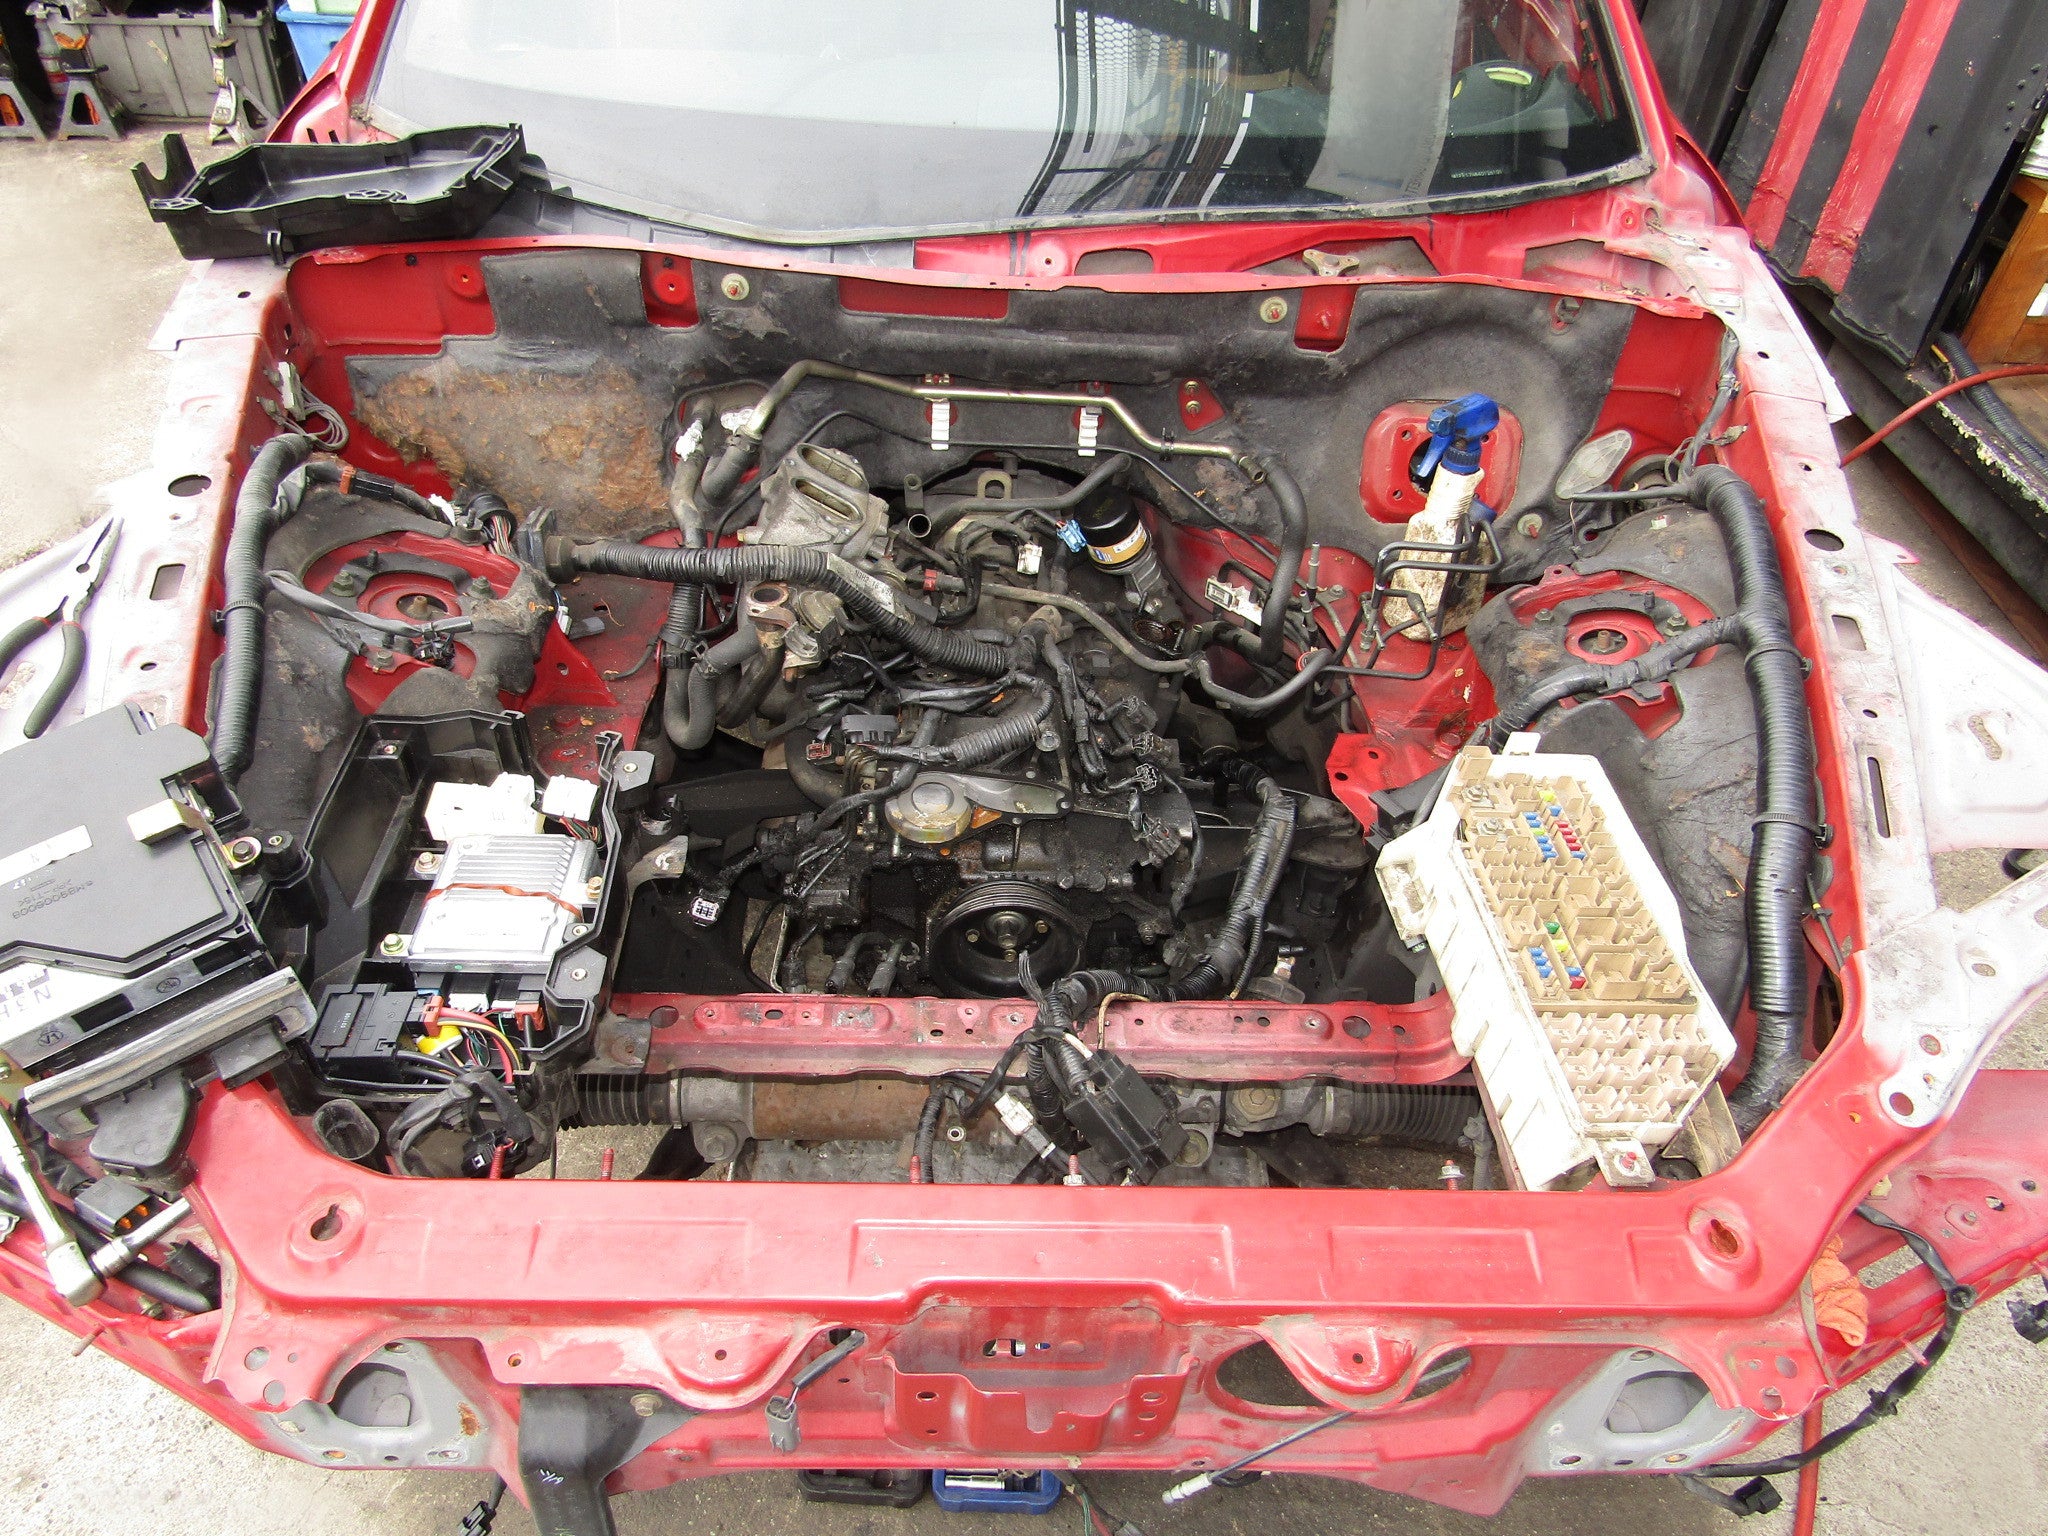 2004 Mazda RX8 A/T 4 Ports 1.3L Renesis - Ap1 Project Picture Gallery